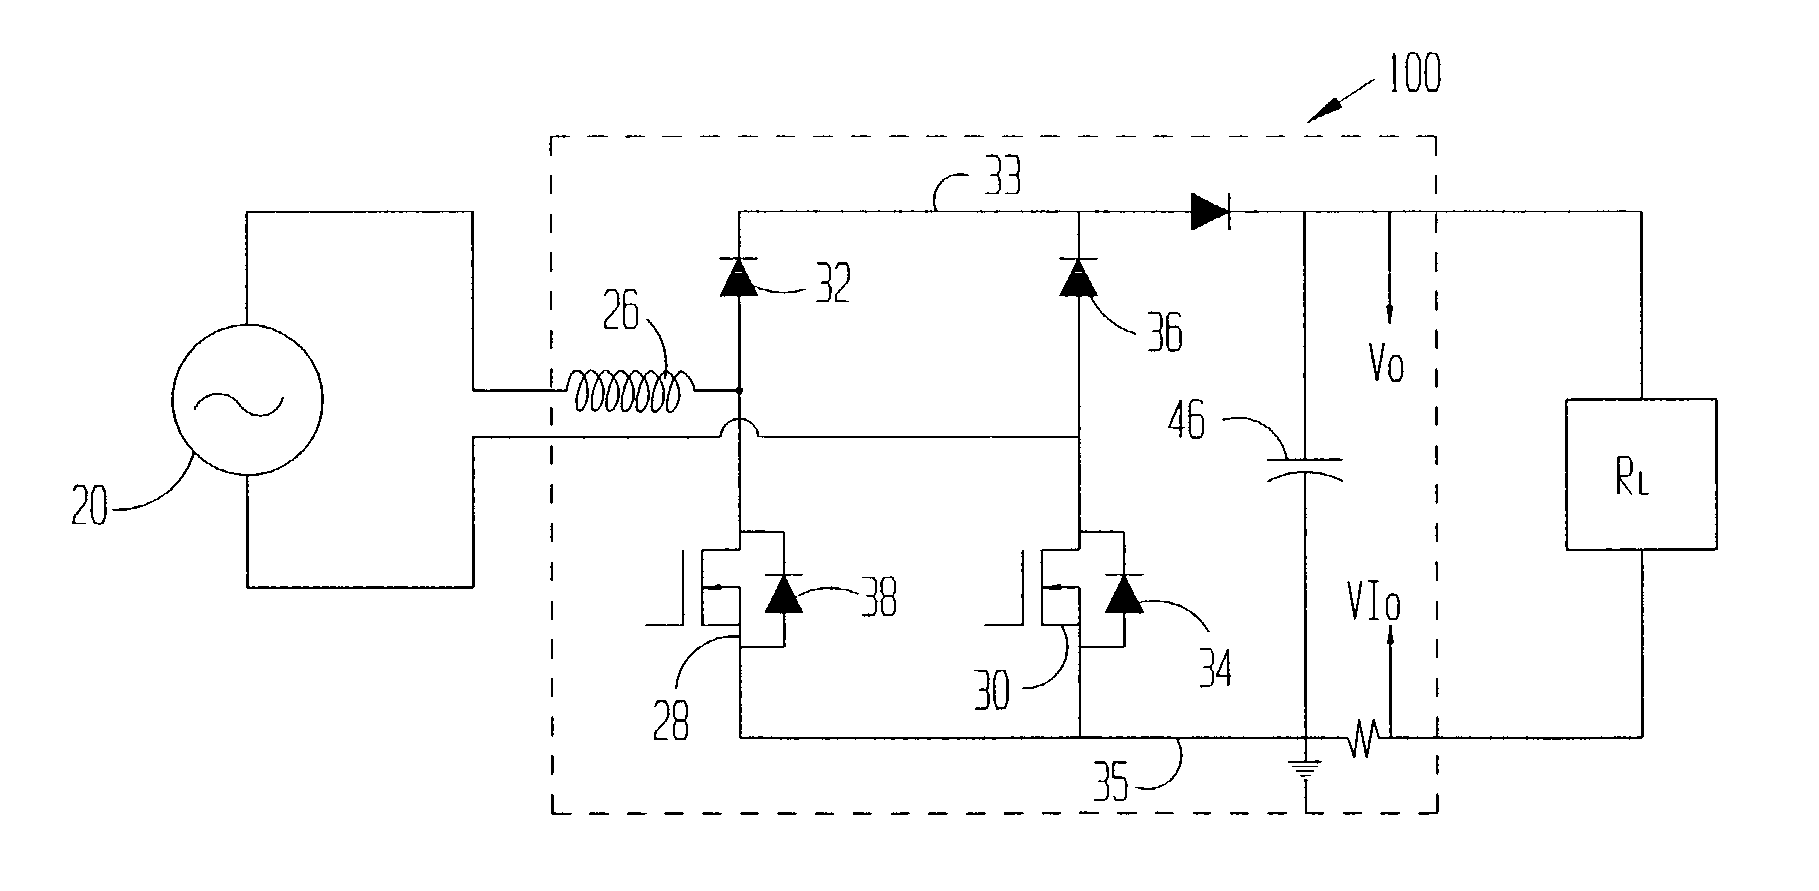 Power supply with integrated bridge and boost circuit